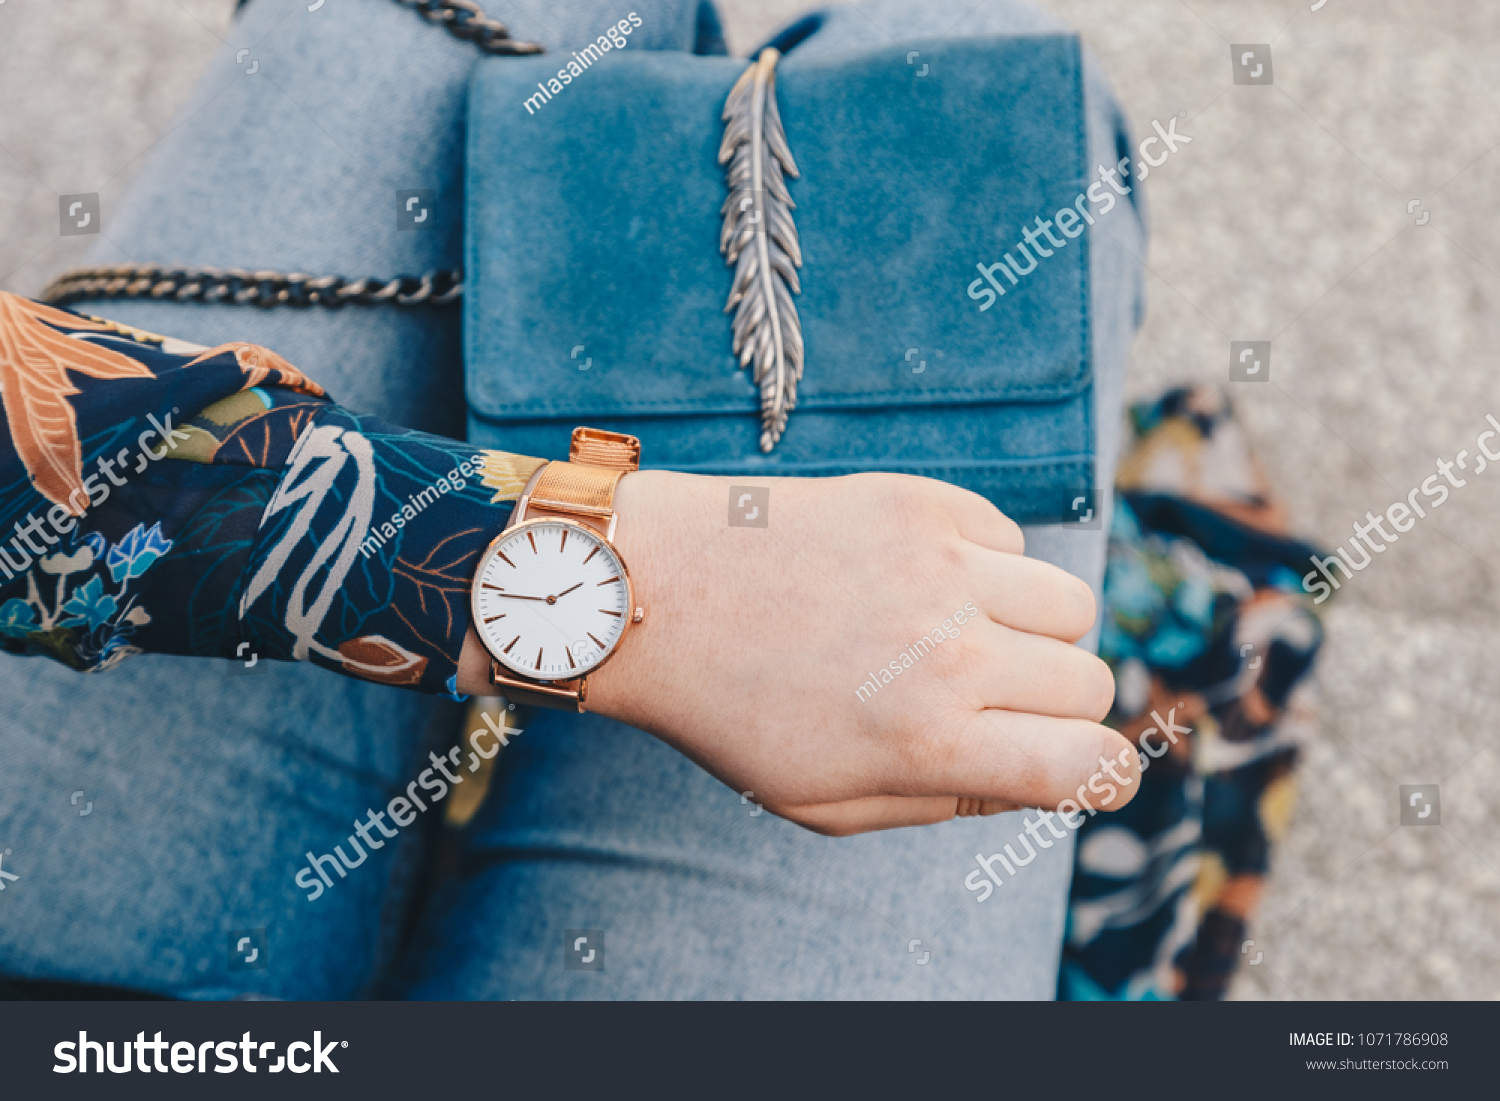 street style fashion details. close up, young fashion blogger wearing a floral jacker, and a white and golden analog wrist watch. checking the time, holding a beautiful suede leather purse.
 #1071786908